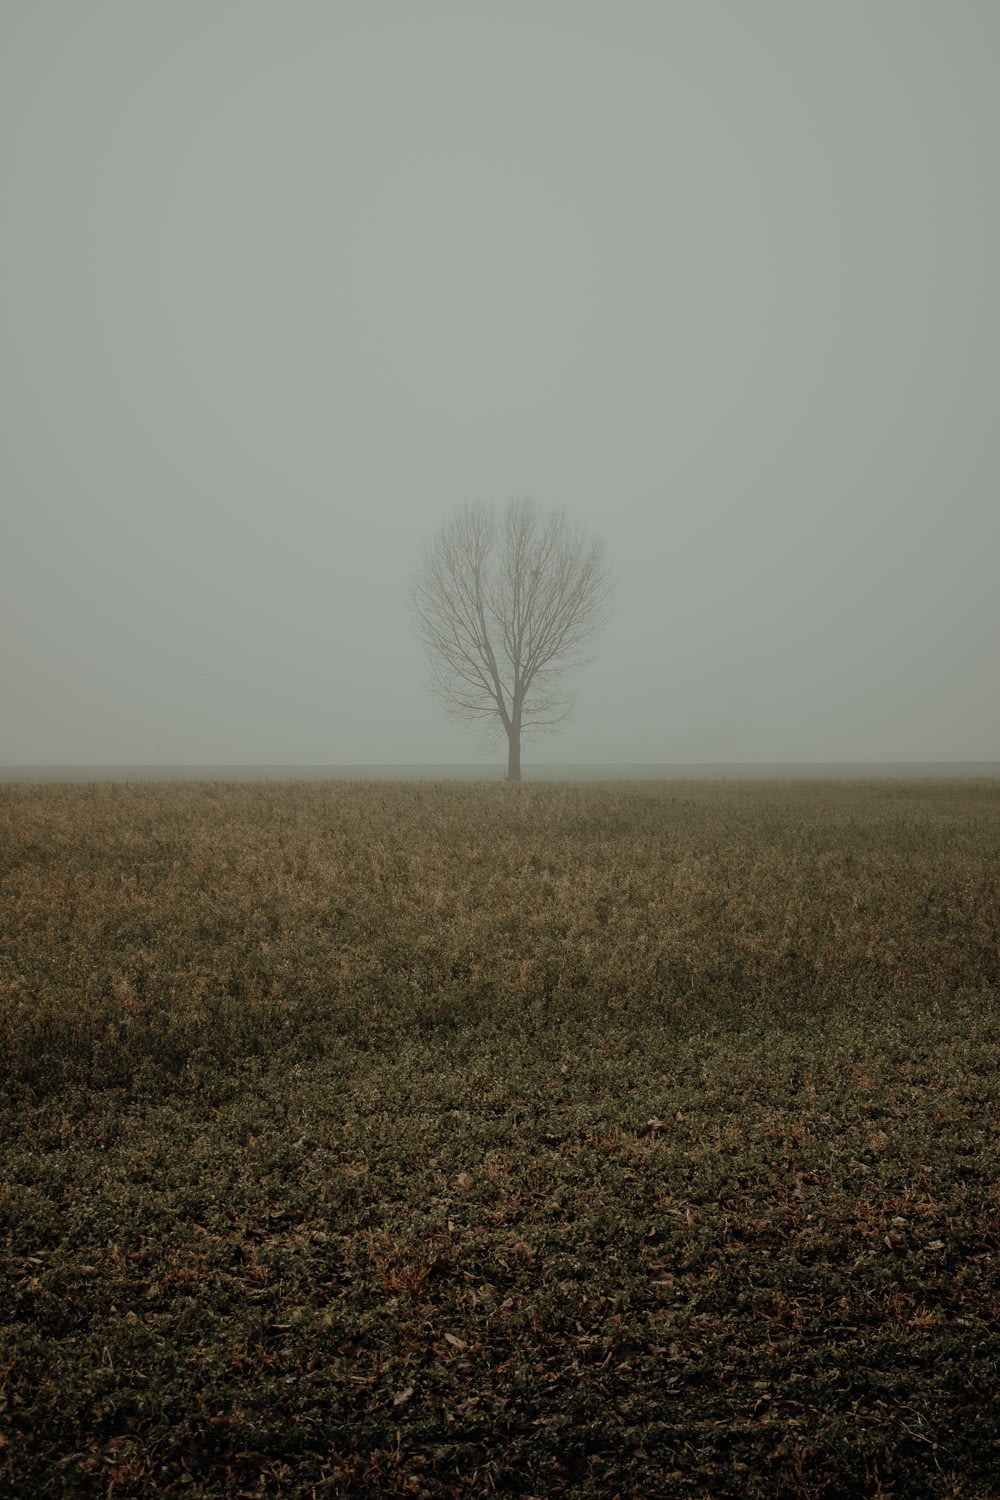 a lone tree in a field on a foggy day